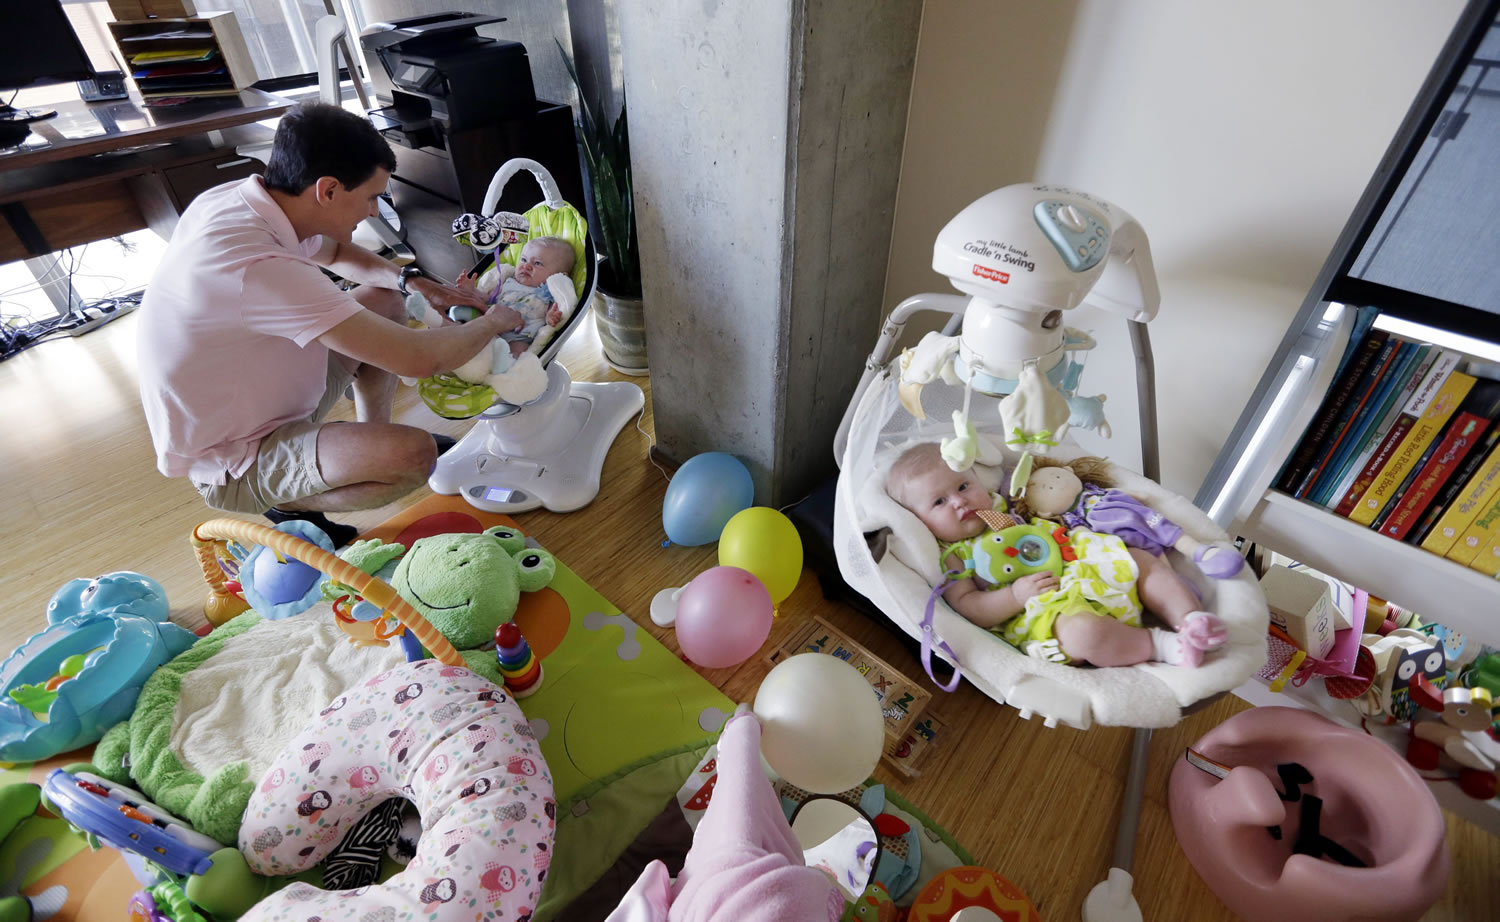 Trey Powell settles his 6-month-old daughter, Kylan, down for a nap as her twin sister, Ashton, lies nearby in their home in Seattle.